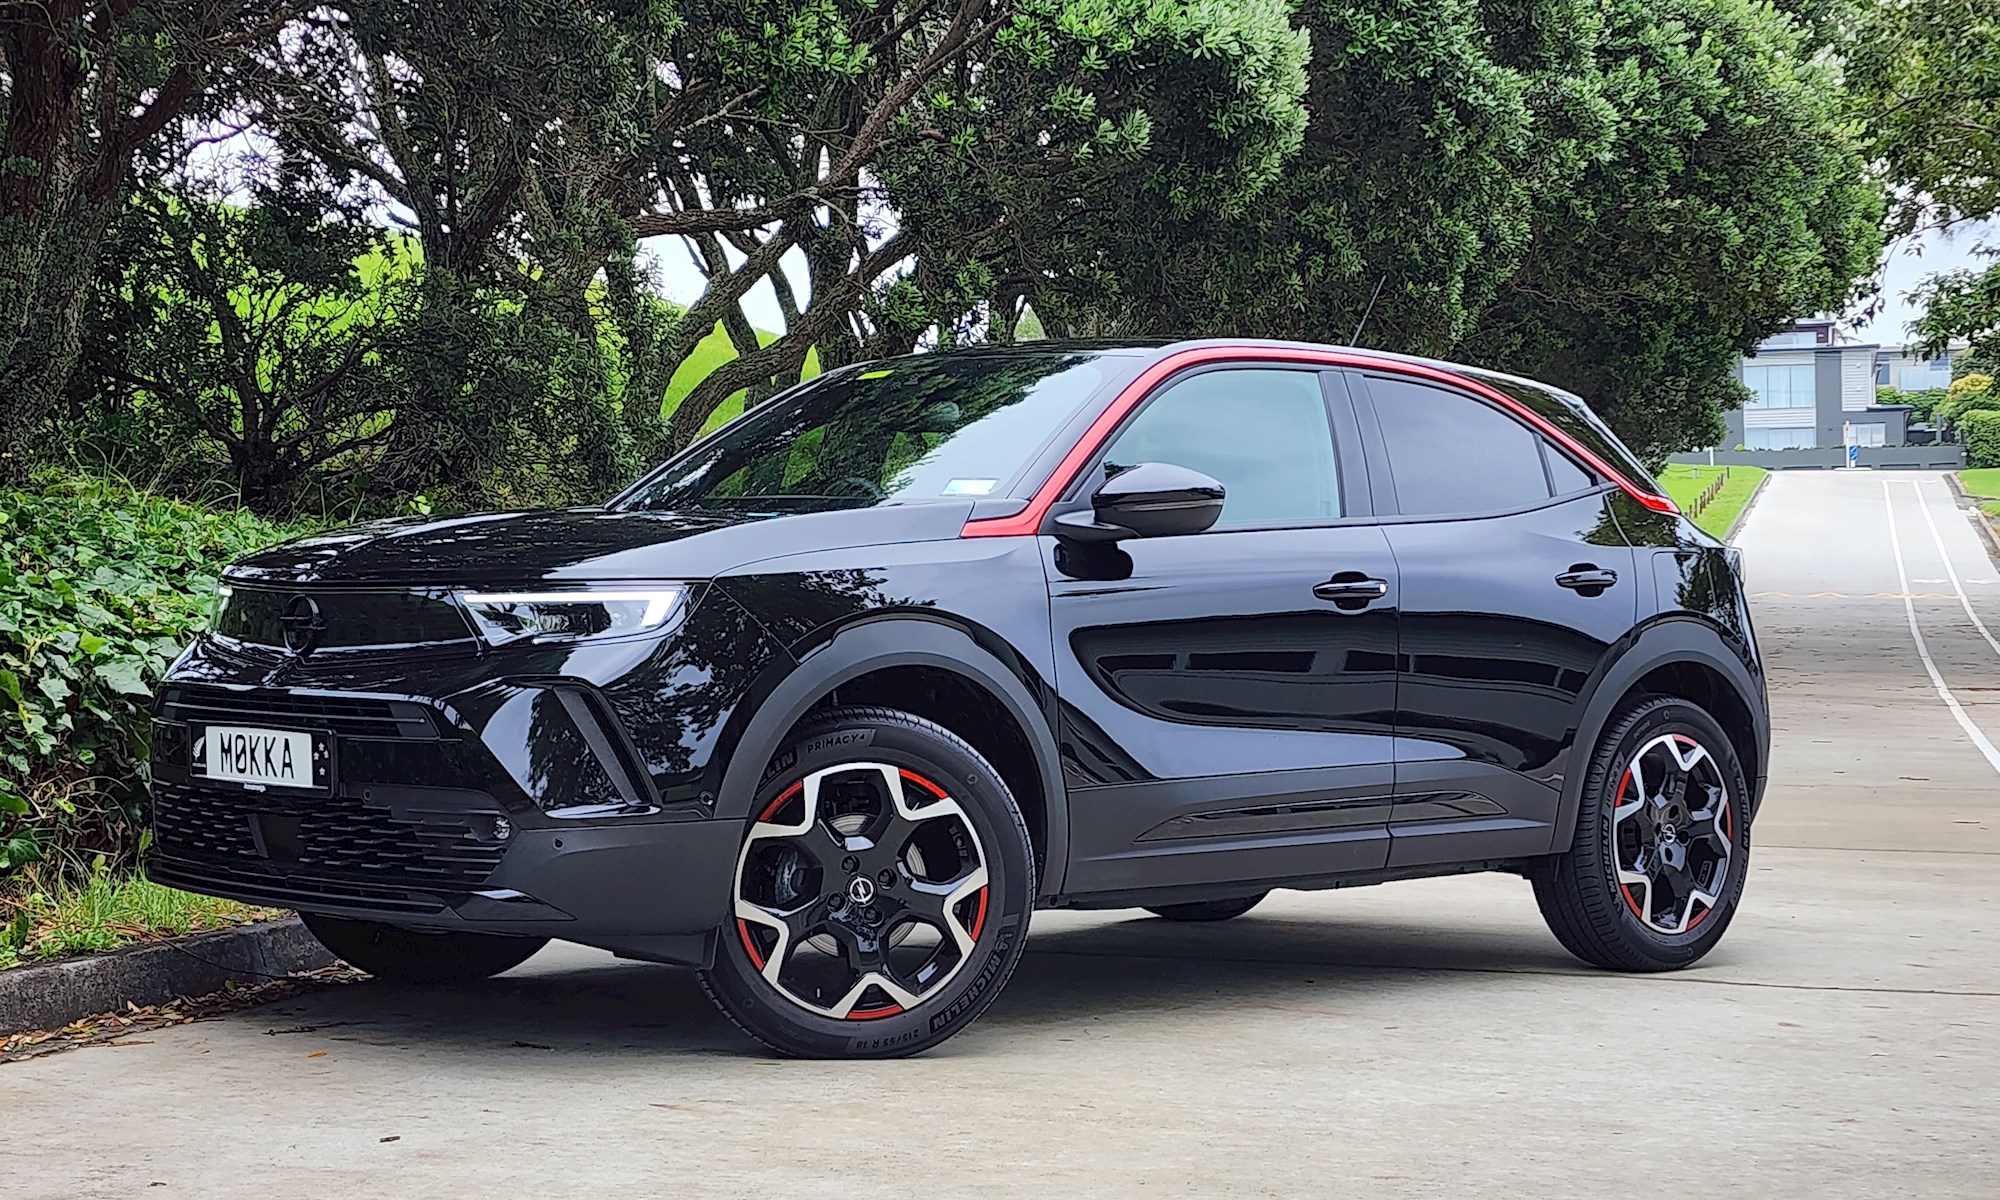 New Vauxhall Mokka Black special edition launched